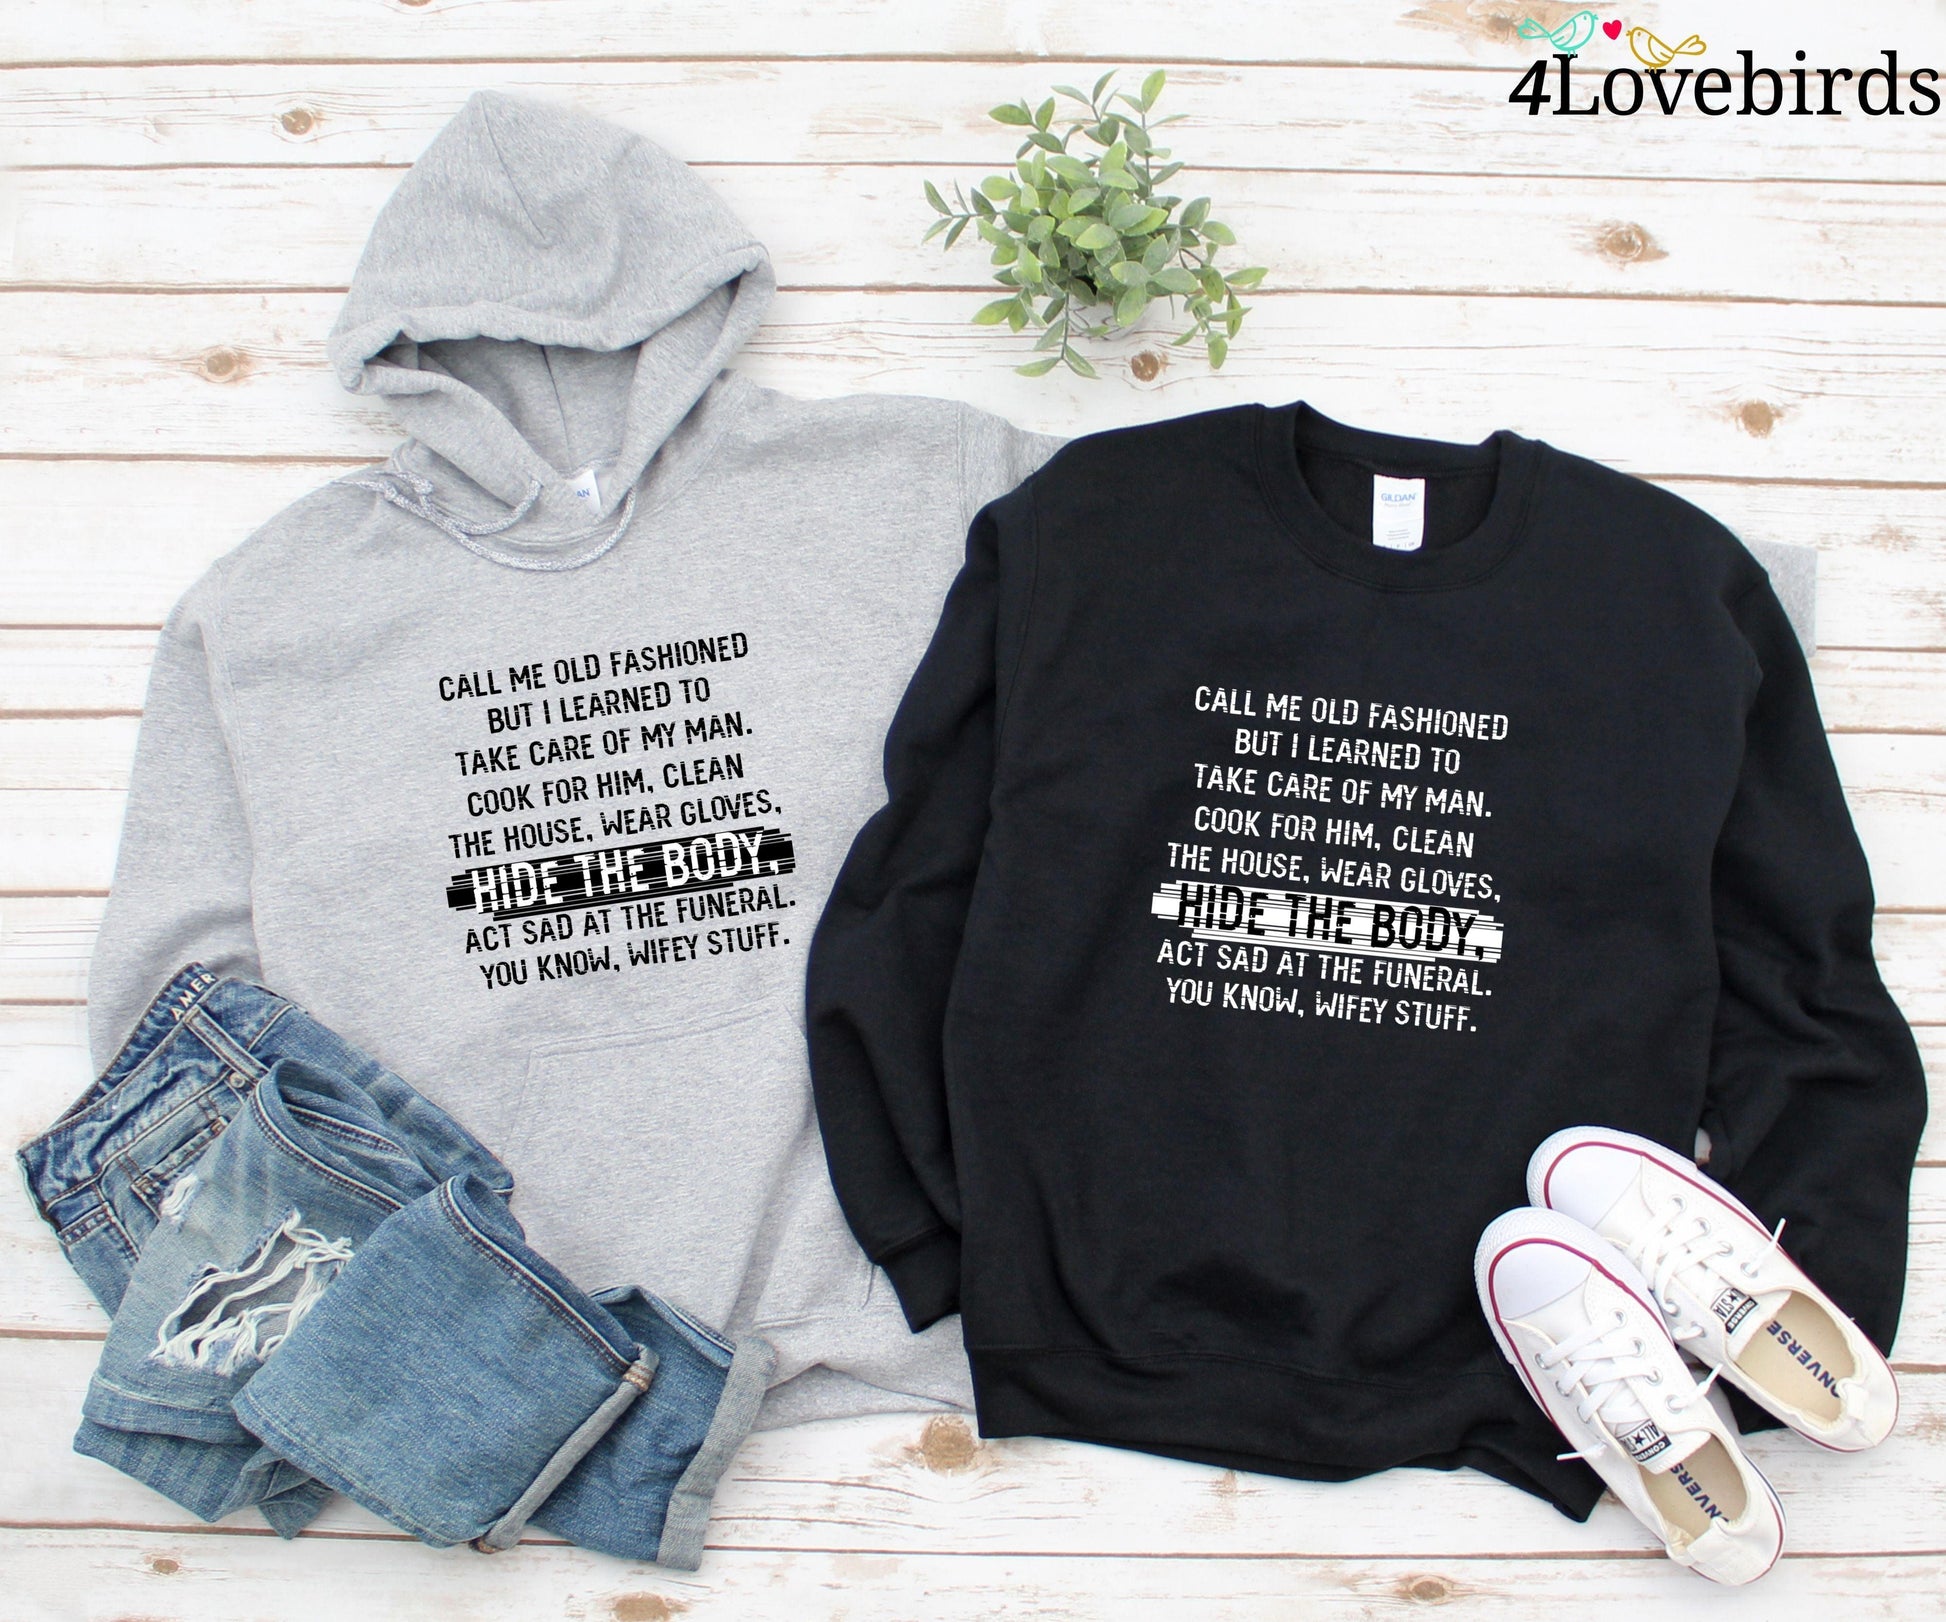 Call Me Old Fashioned... T-Shirt, Funny Hoodies, Humorous Sweatshirts, Funny Gifts, Couple Gifts - 4Lovebirds